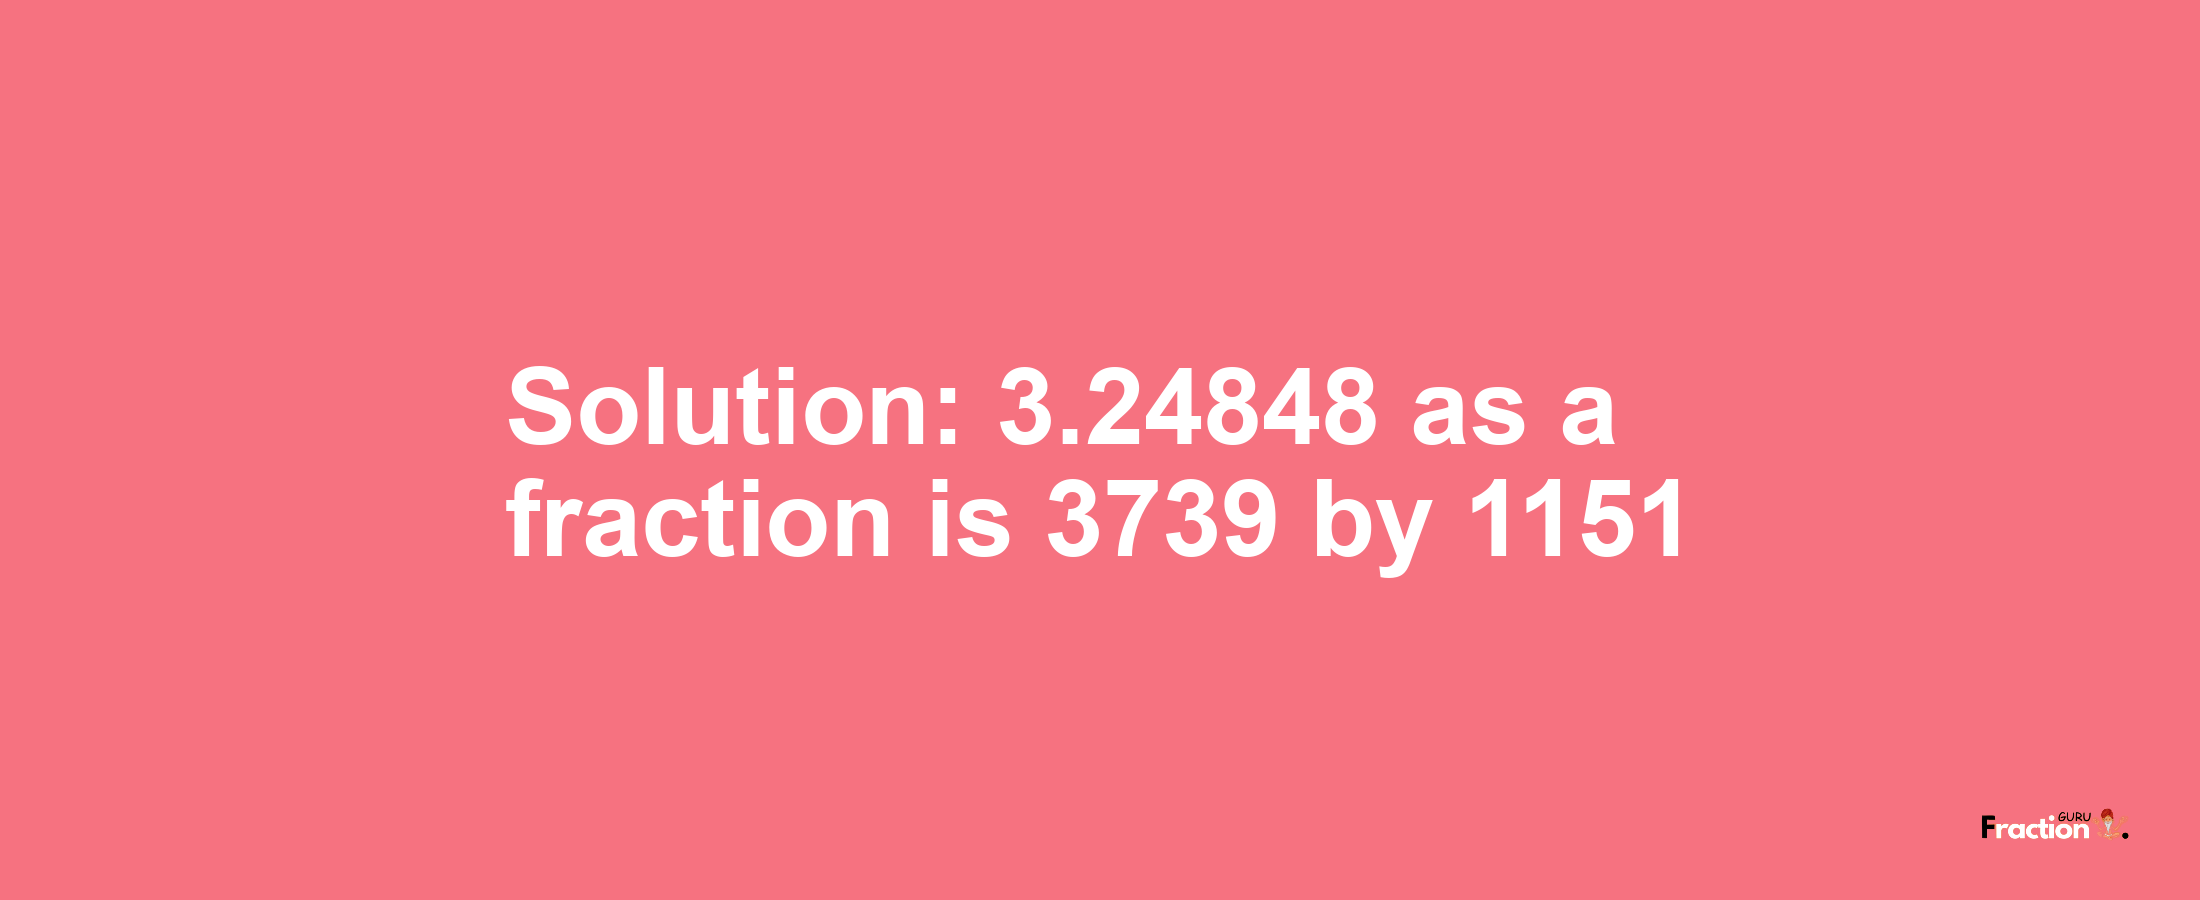 Solution:3.24848 as a fraction is 3739/1151